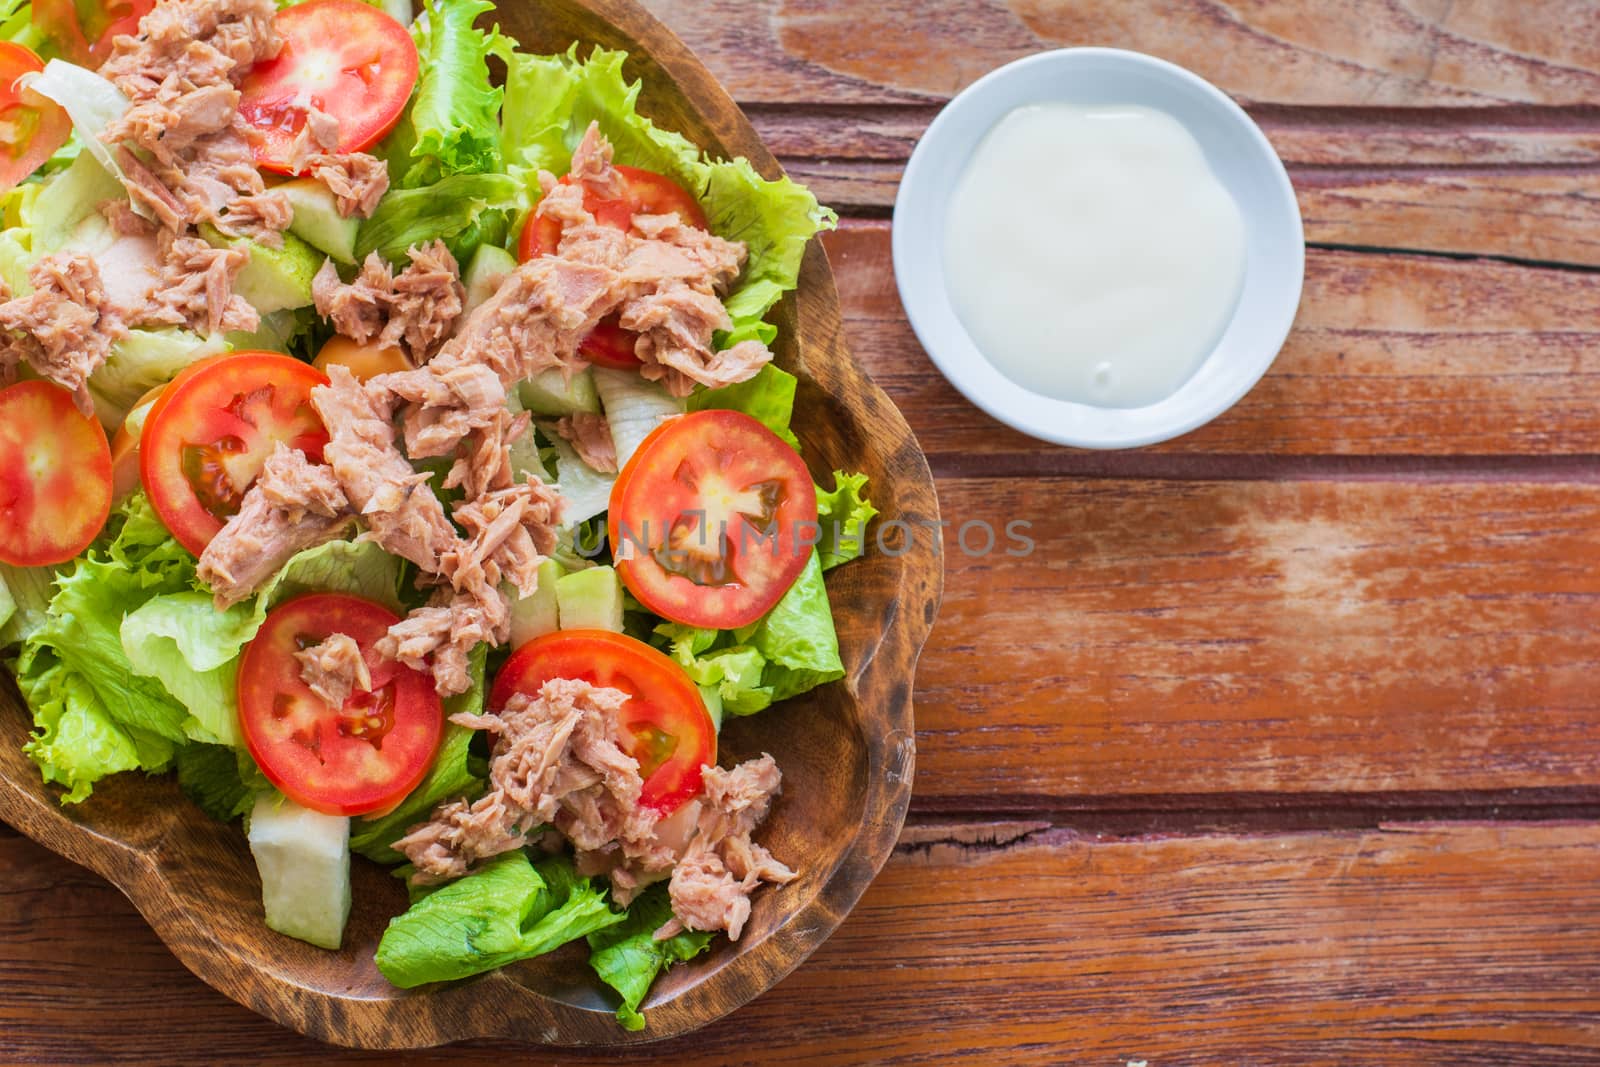 Tuna salad with red raw tomato, fresh lettuce. Hight vitamins and low fat for loose weight. Heathy food concept.